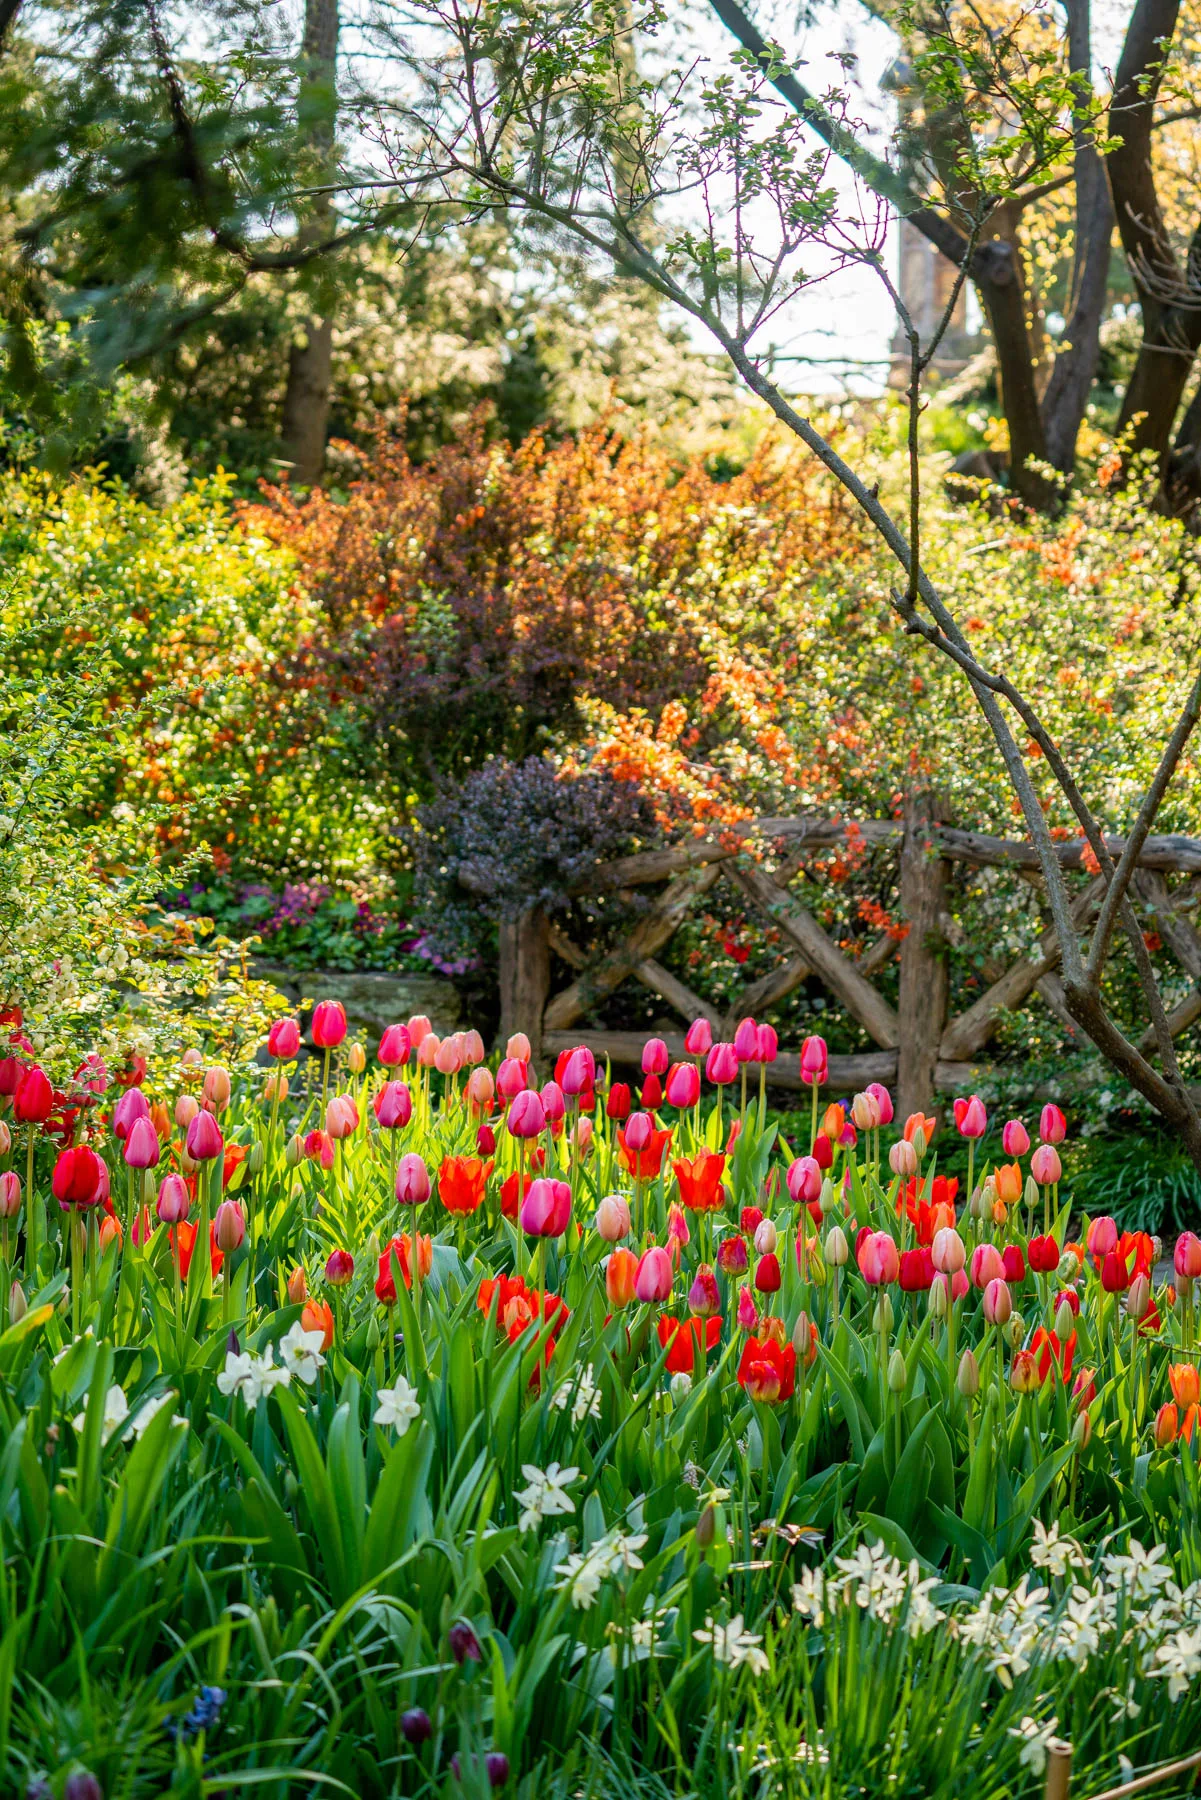 Tulips at the Shakespeare Garden in Central Park in NYC